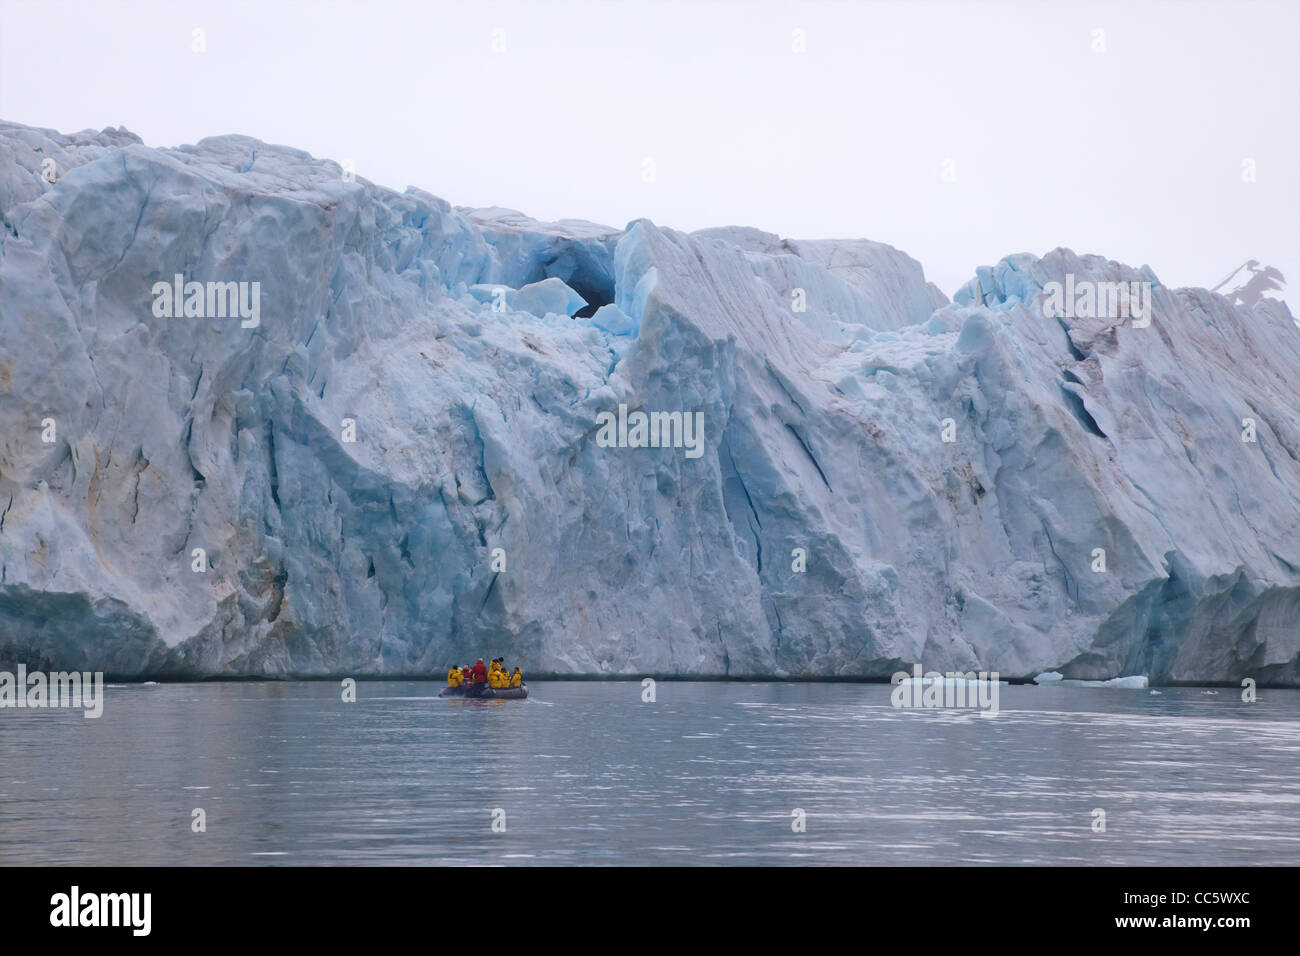 Tourists in zodiac inflatable boat near 14th July Glacier, Spitzbergen, Svalbard, Norway, Europe Stock Photo